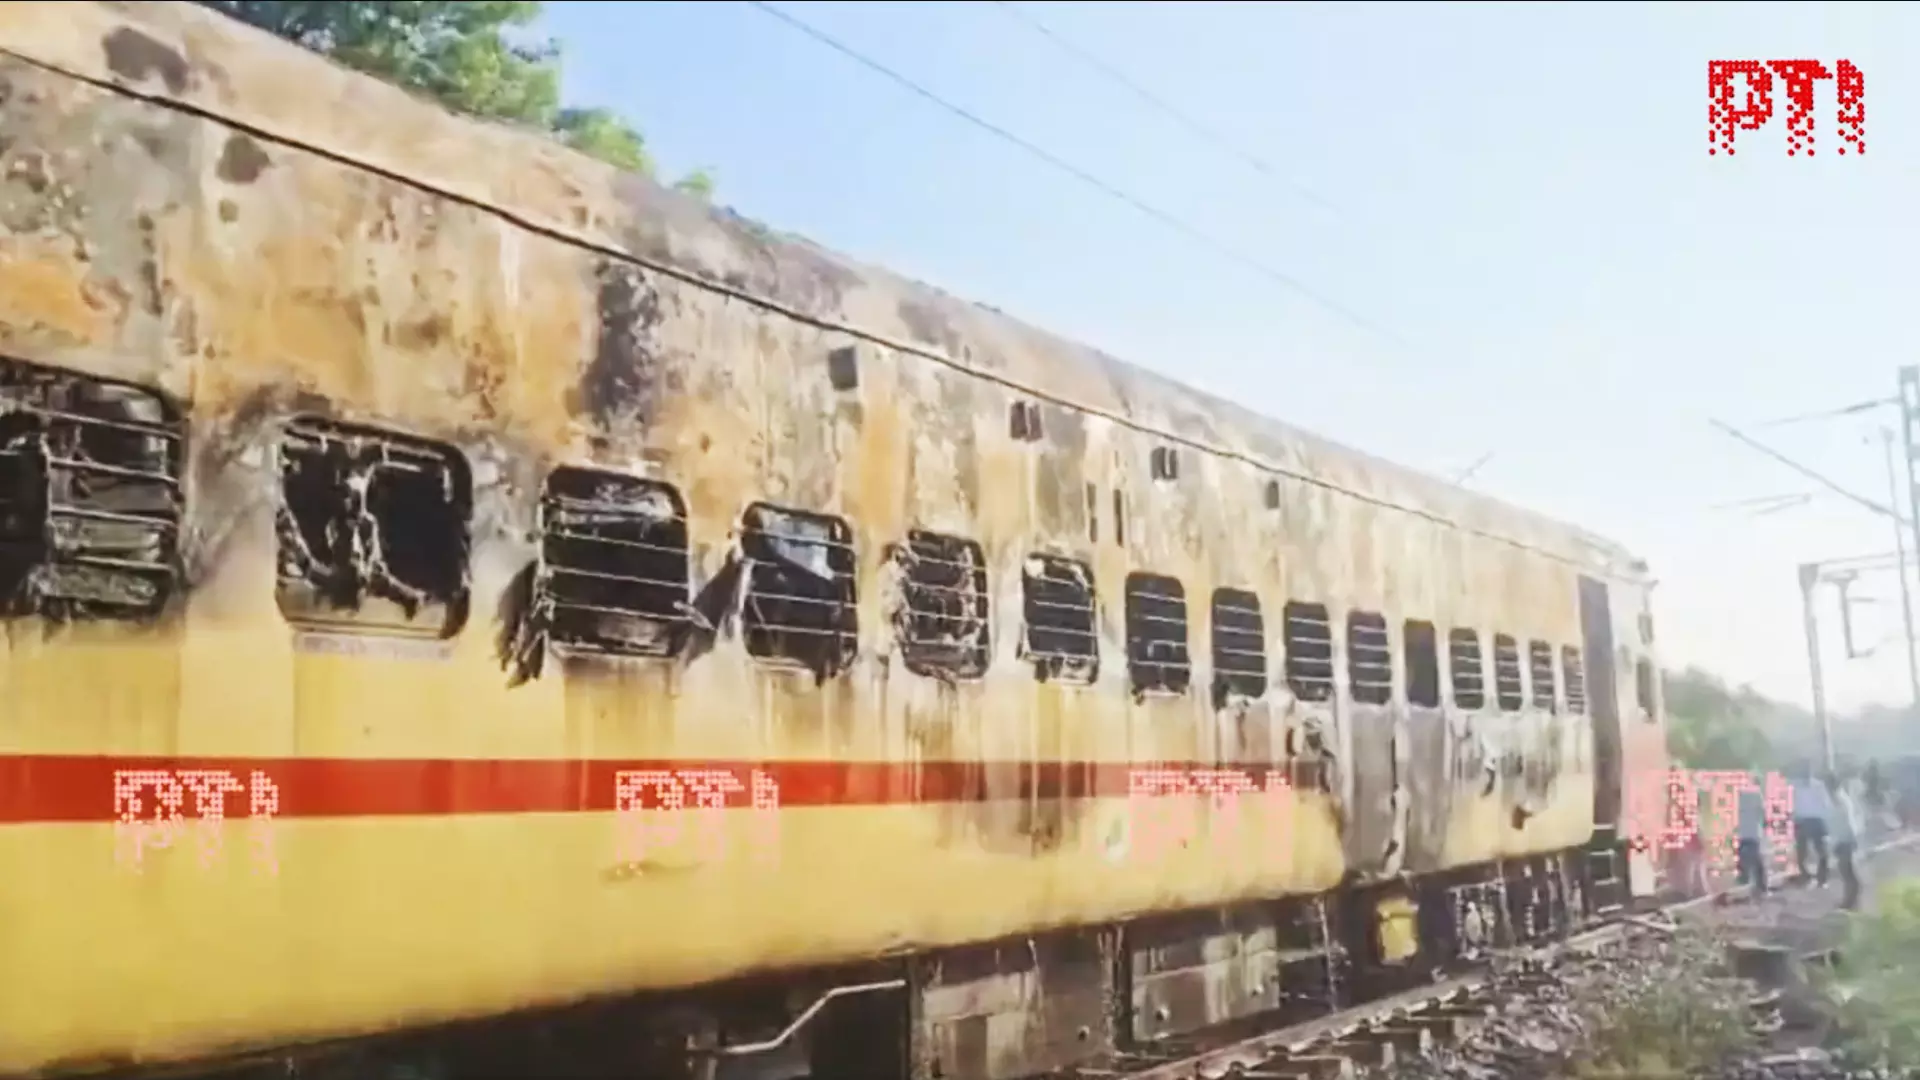 Bodies of 9 pilgrims killed in Tamil Nadu train fire tragedy arrive in Lucknow